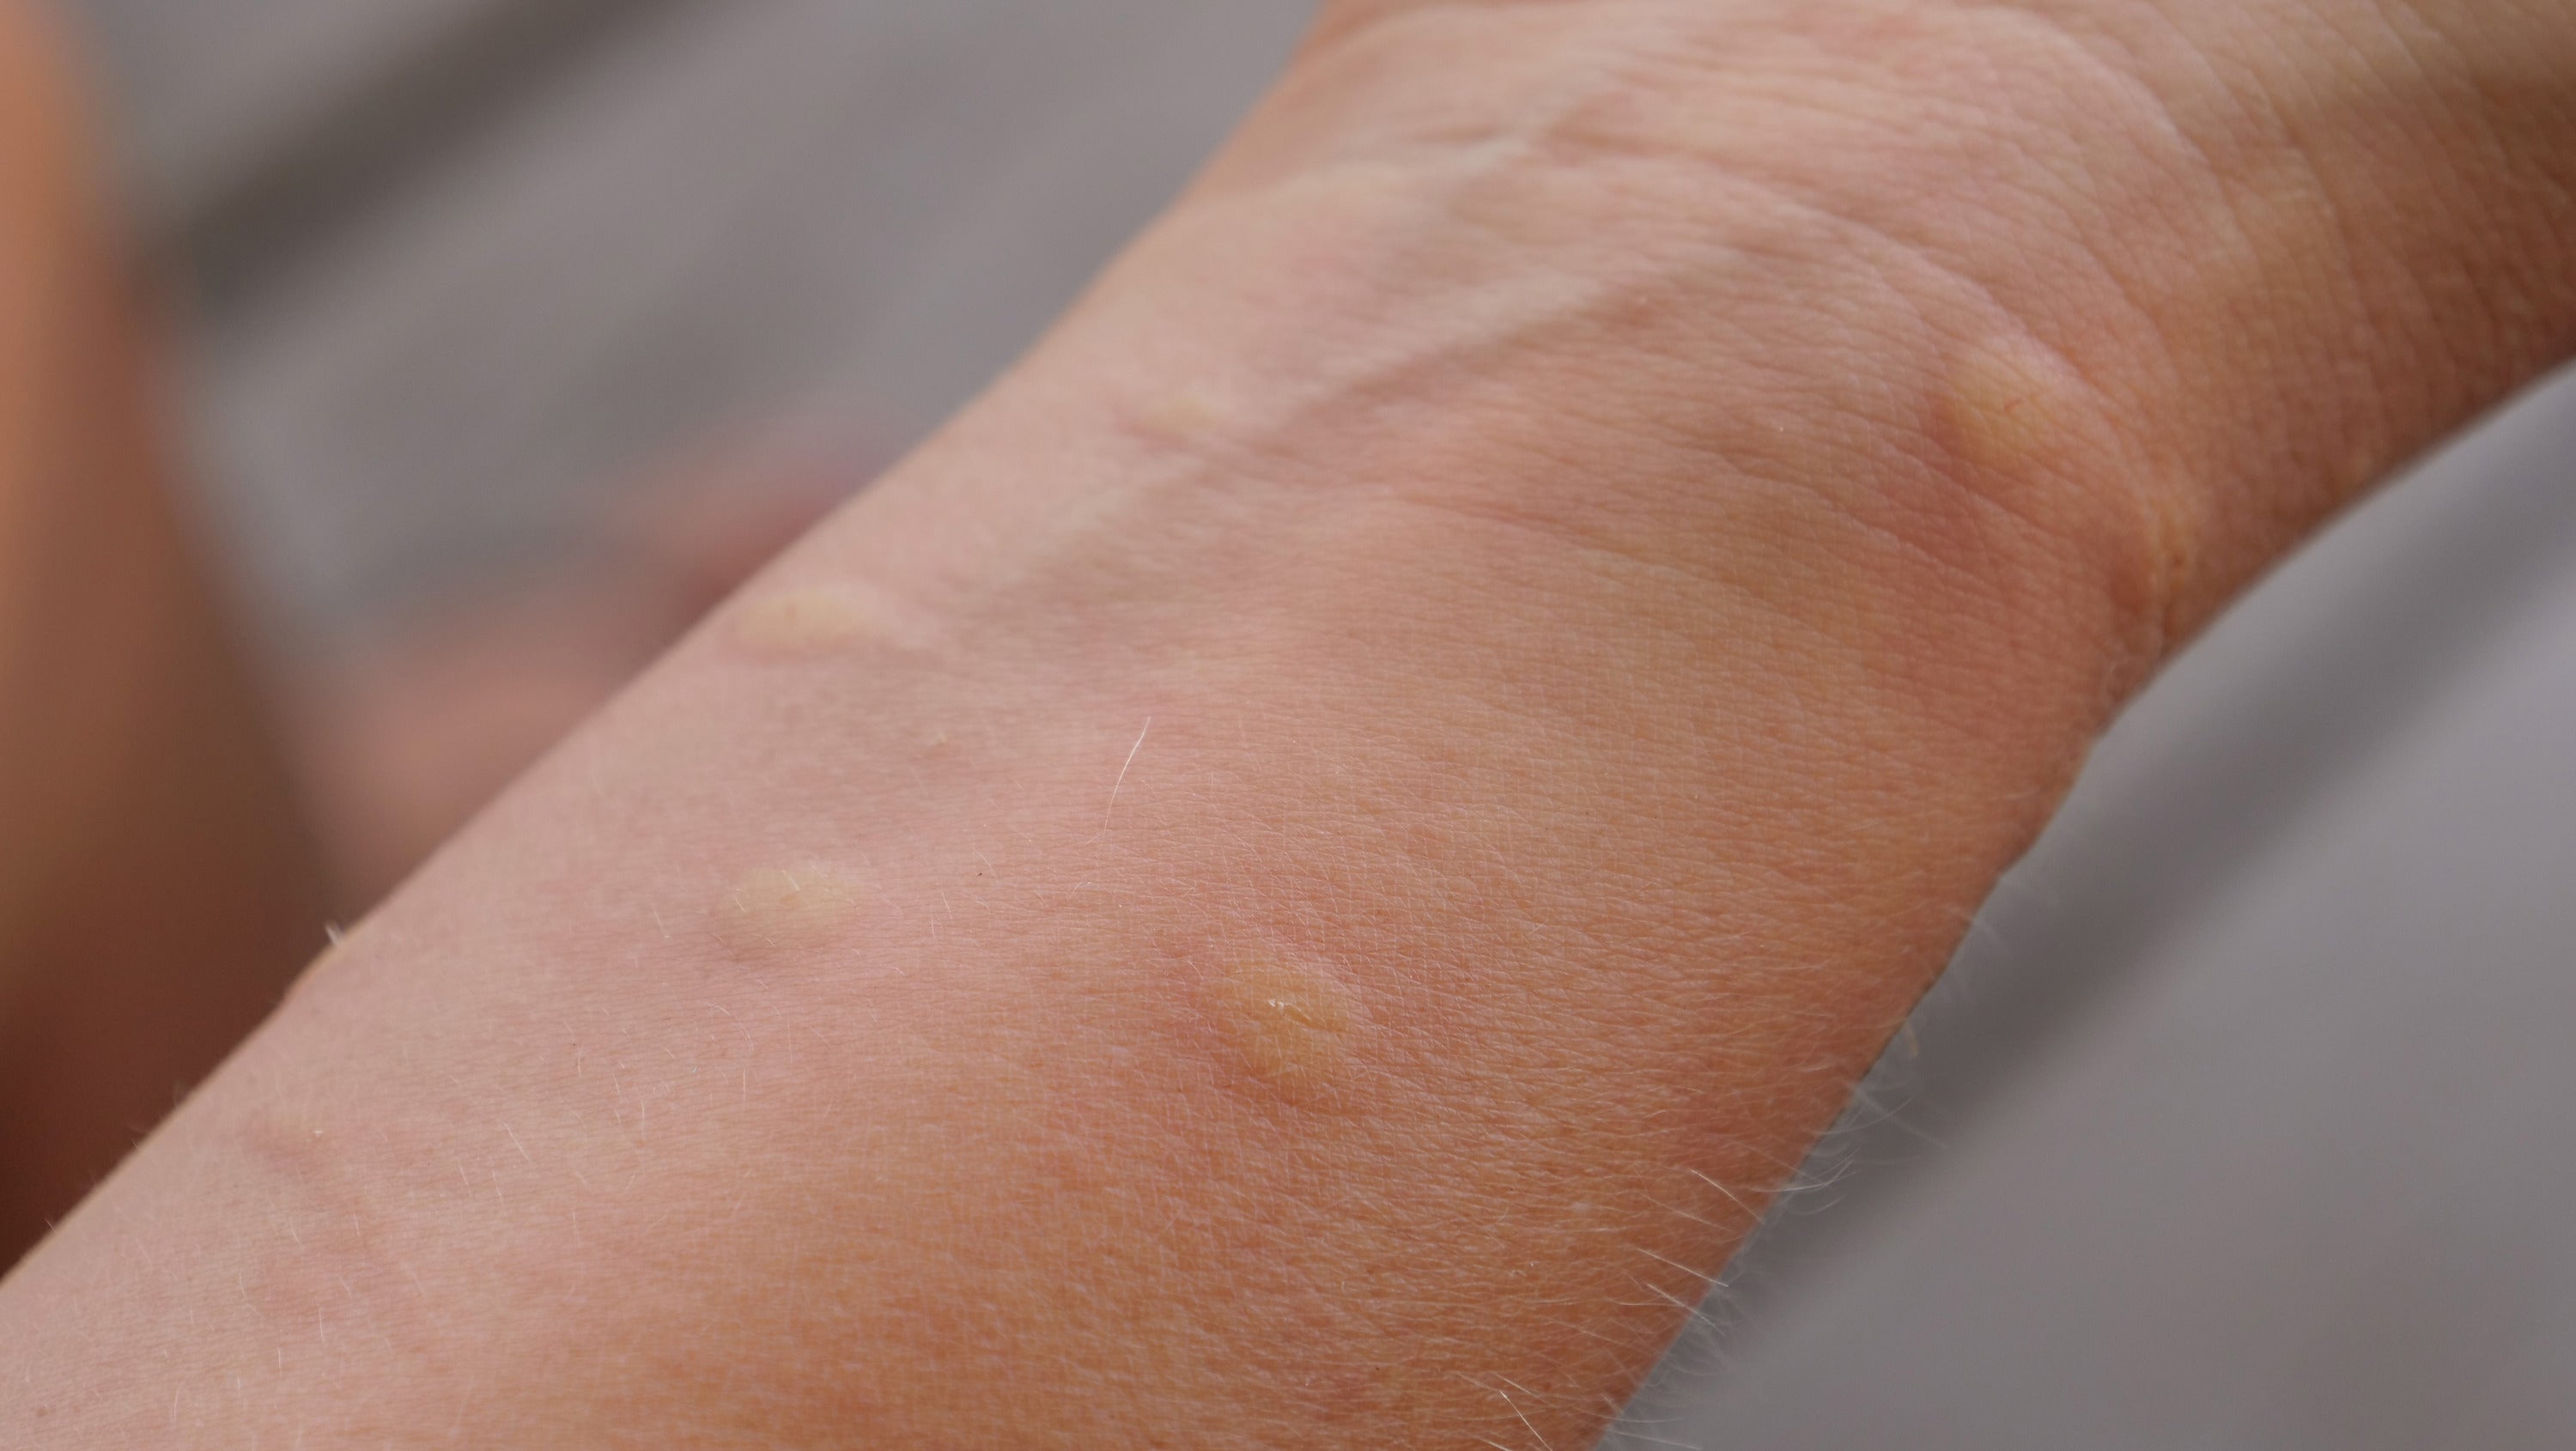 Insect bite allergies are caused by previous exposure and sensitization